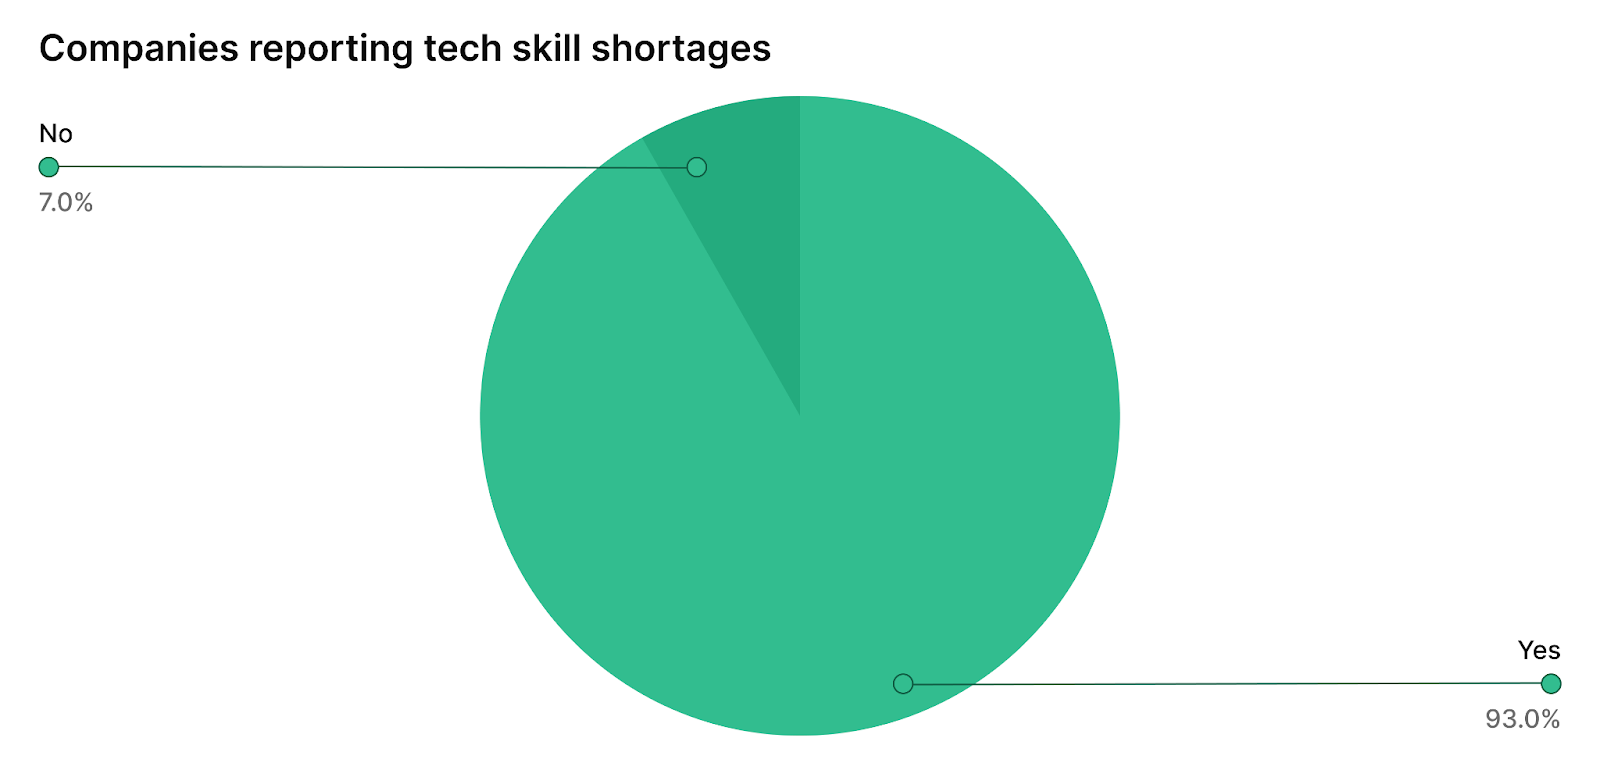 Nearly all companies (93%) of all sizes have reported encountering tech skill shortages in the last 12 months, marking an increase from 86% in 2021